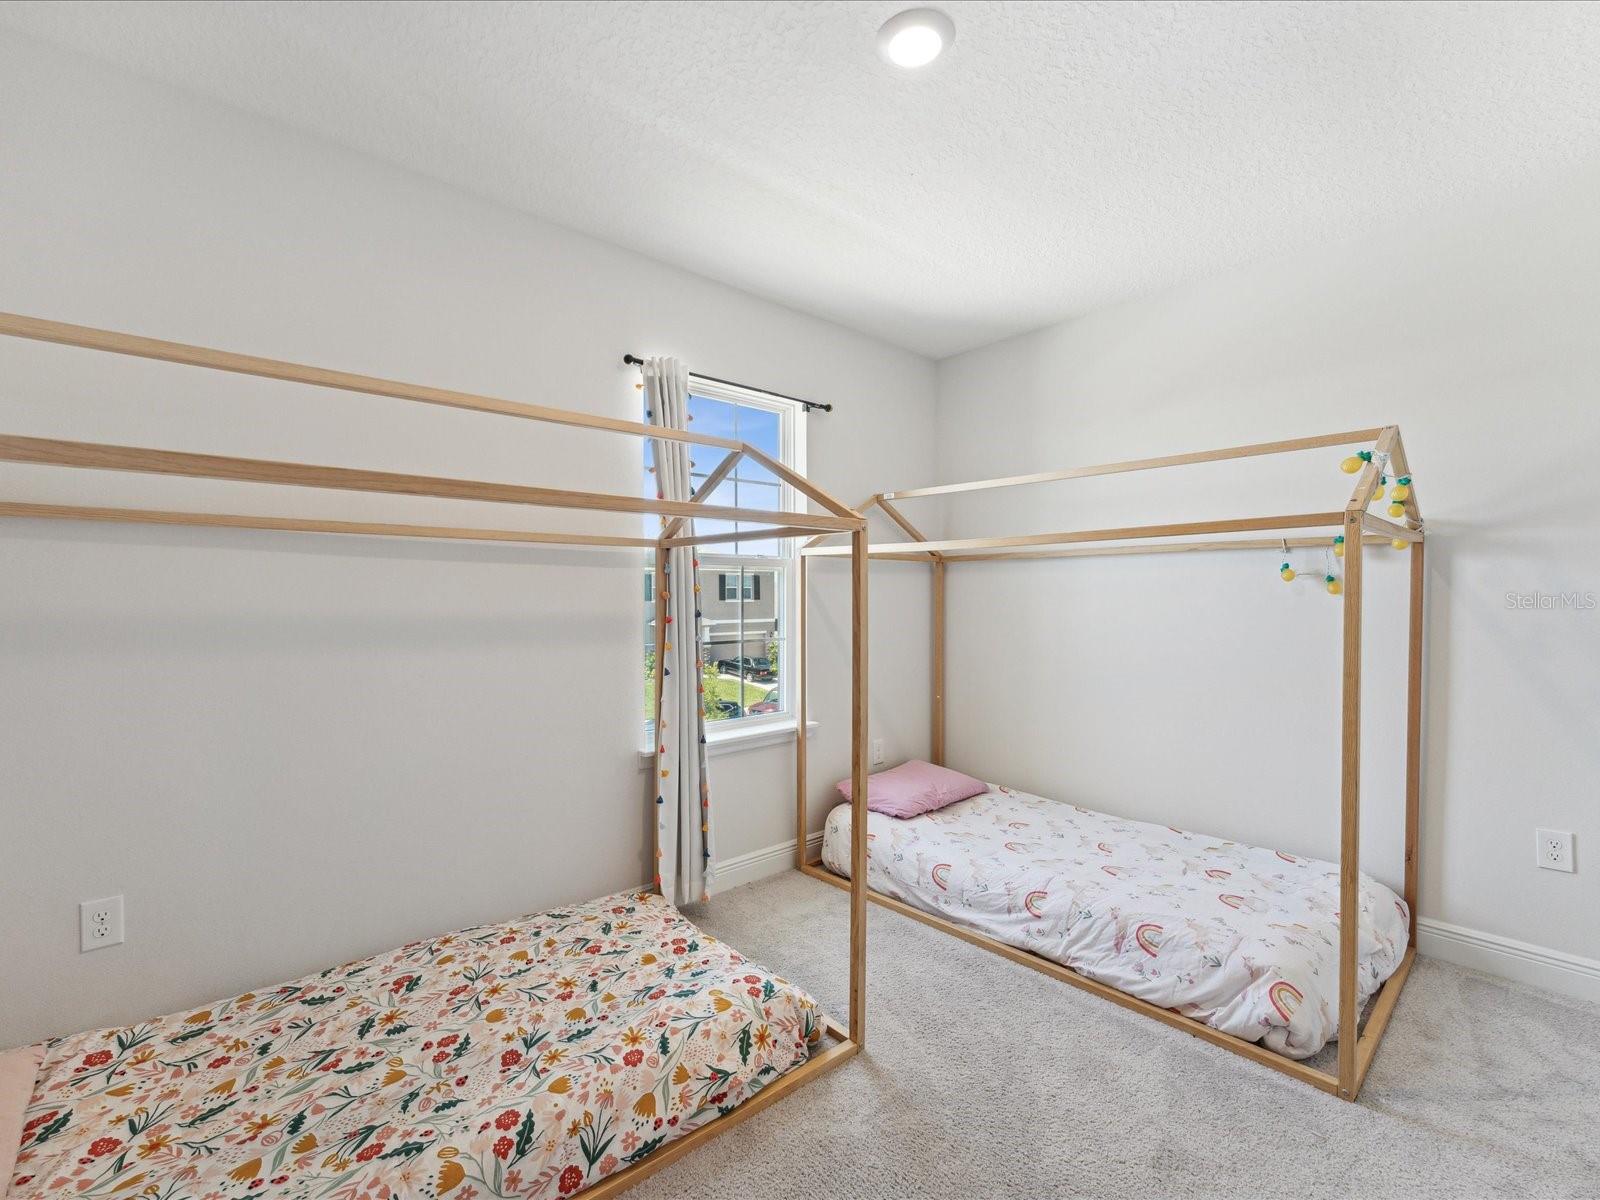 The 2nd bedroom has is the bedroom closest to the primary bedroom.